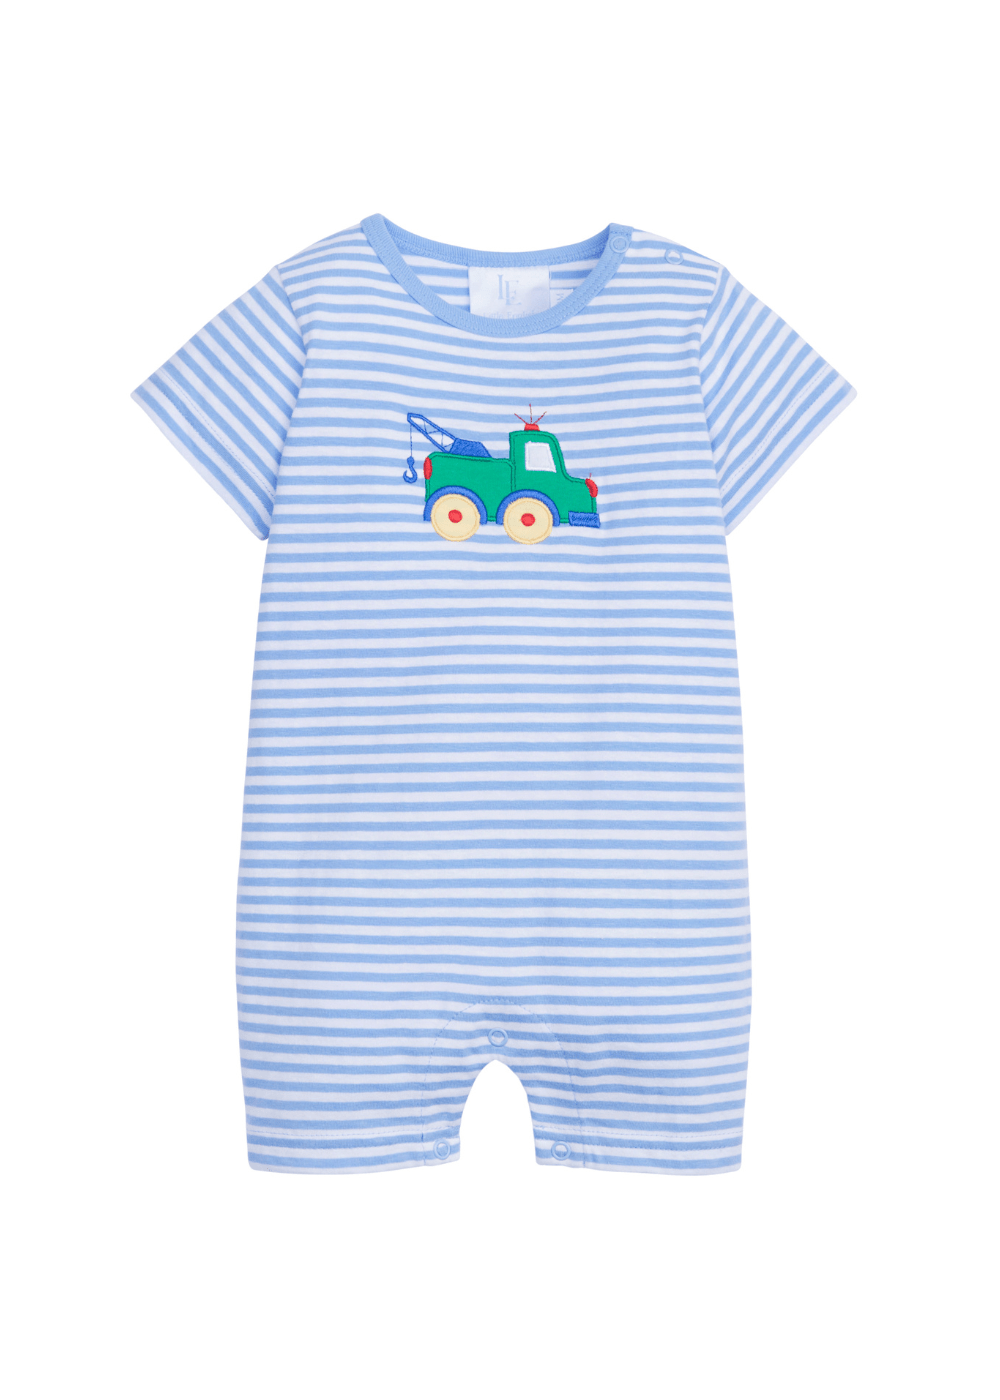 classic childrens clothing boys blue and white striped romper with tow truck applique